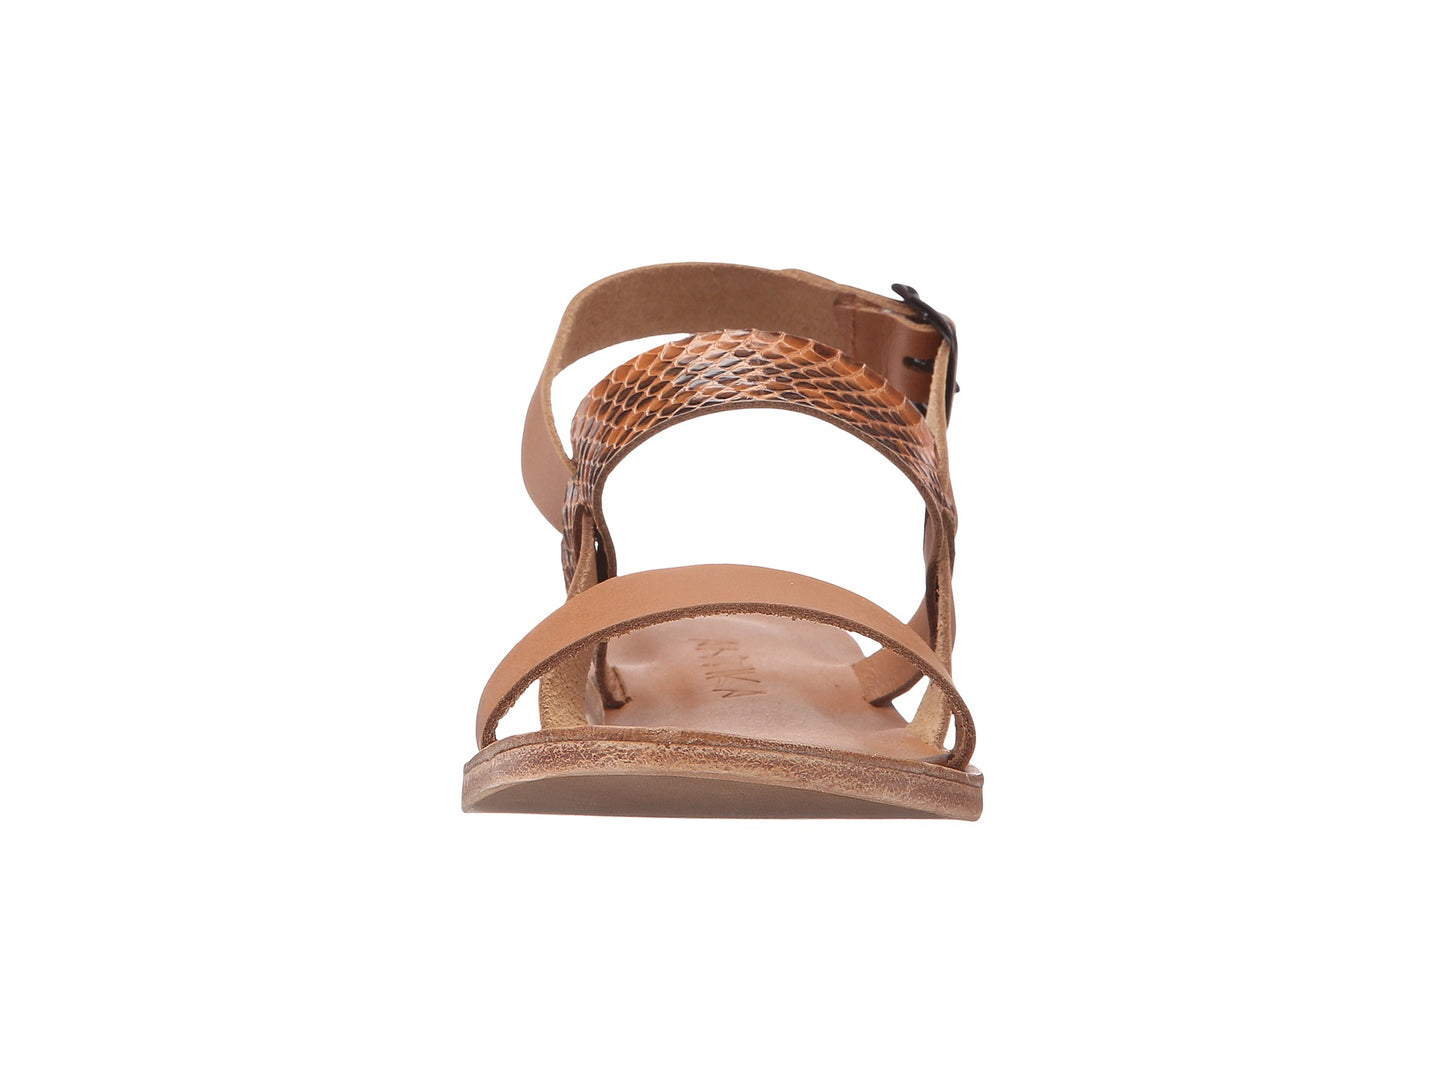 Abbot Kinney Blvd tan snake skin, handmade leather buckle sandals with front loop - front View